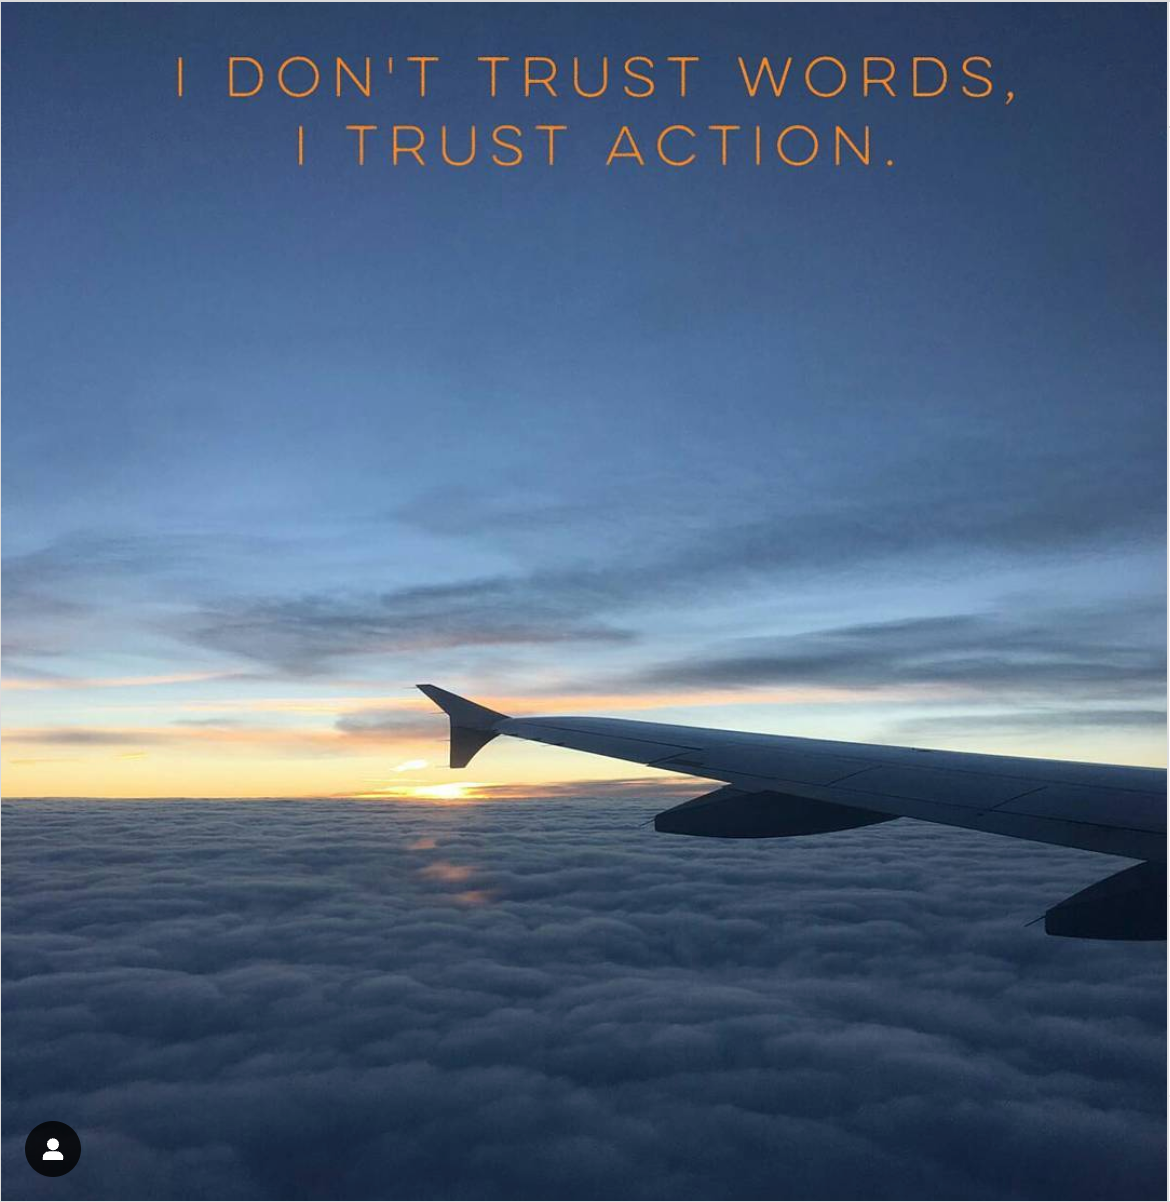 I don't trust words, I trust action.